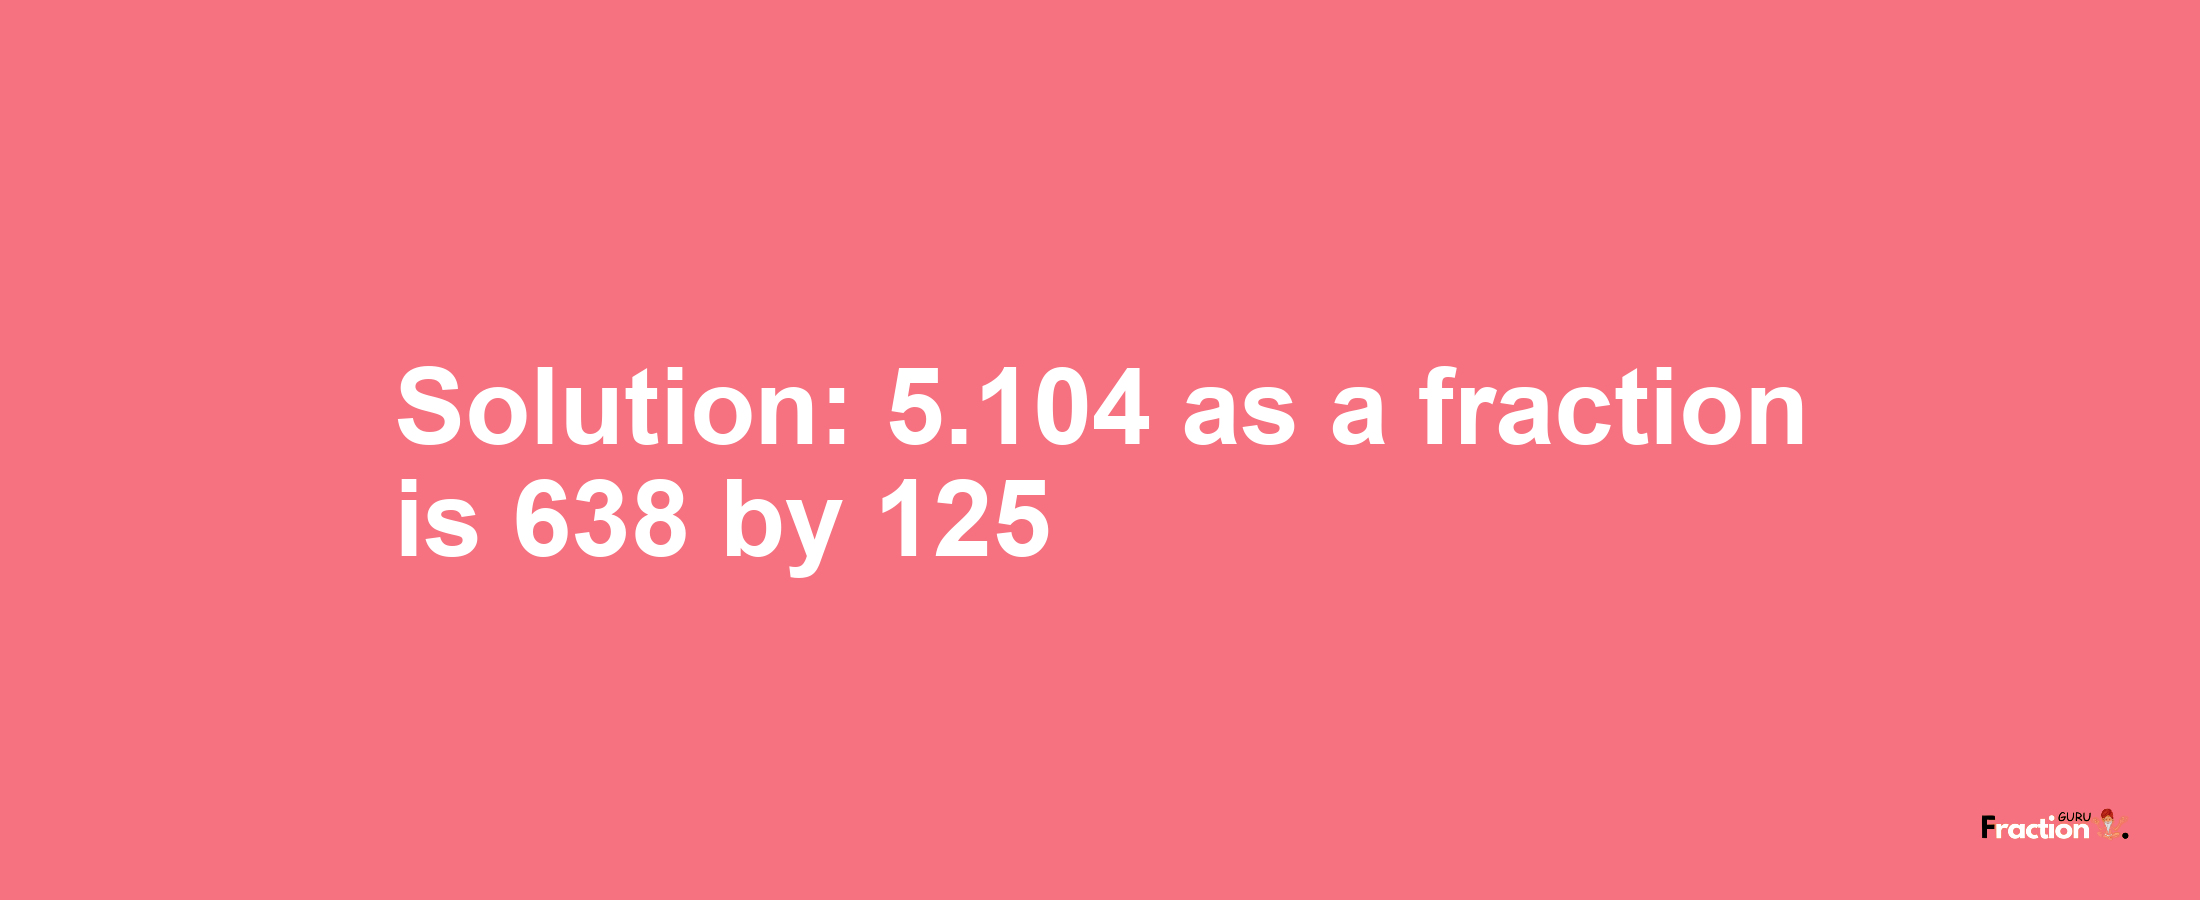 Solution:5.104 as a fraction is 638/125